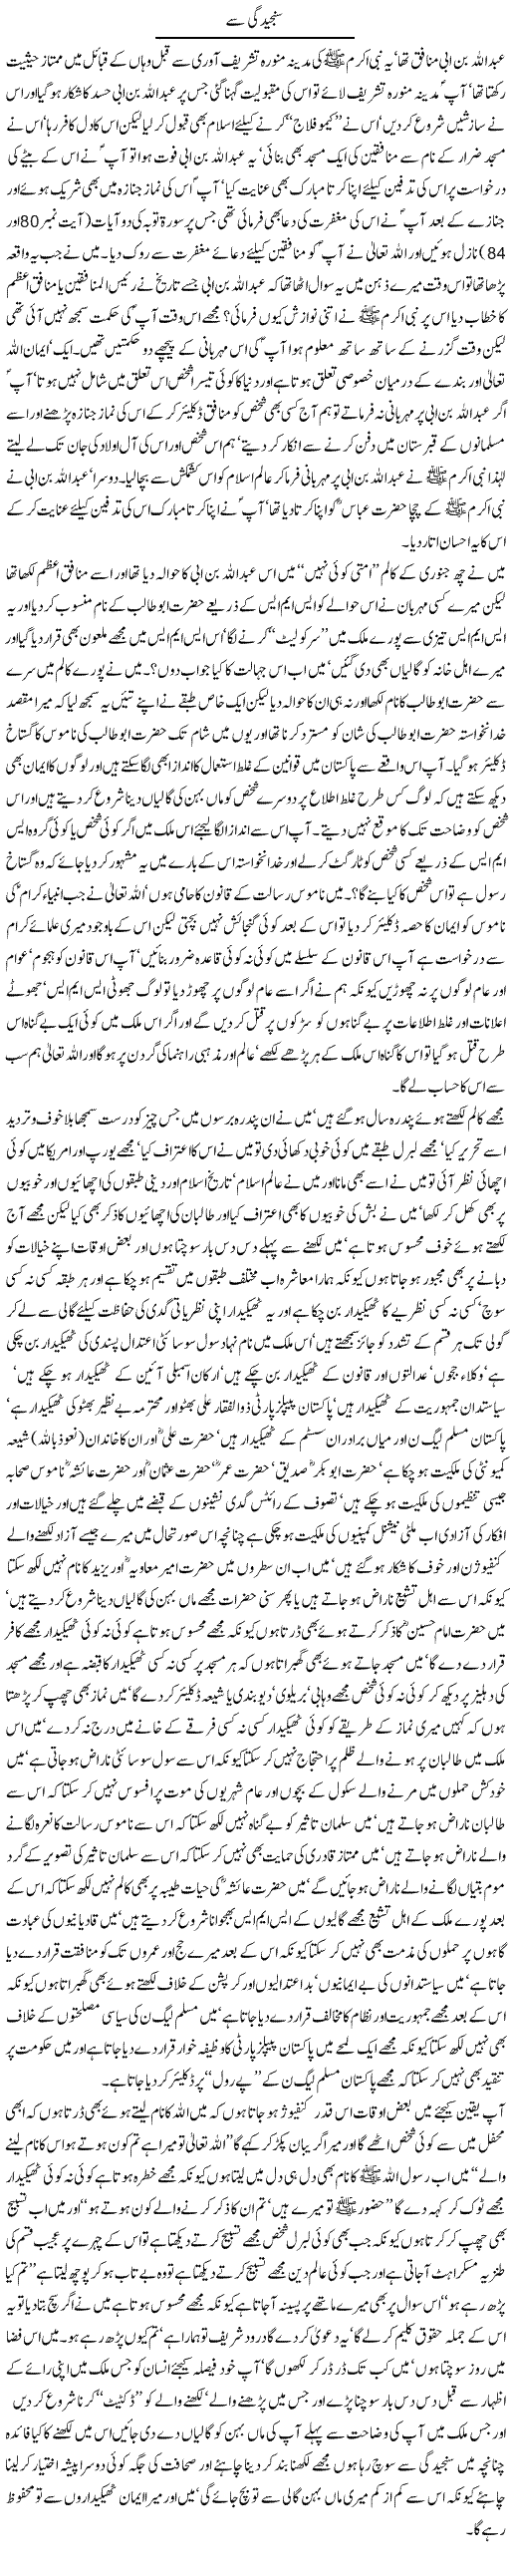 Serious Issue Express Column Javed Chaudhry 9 January 2011